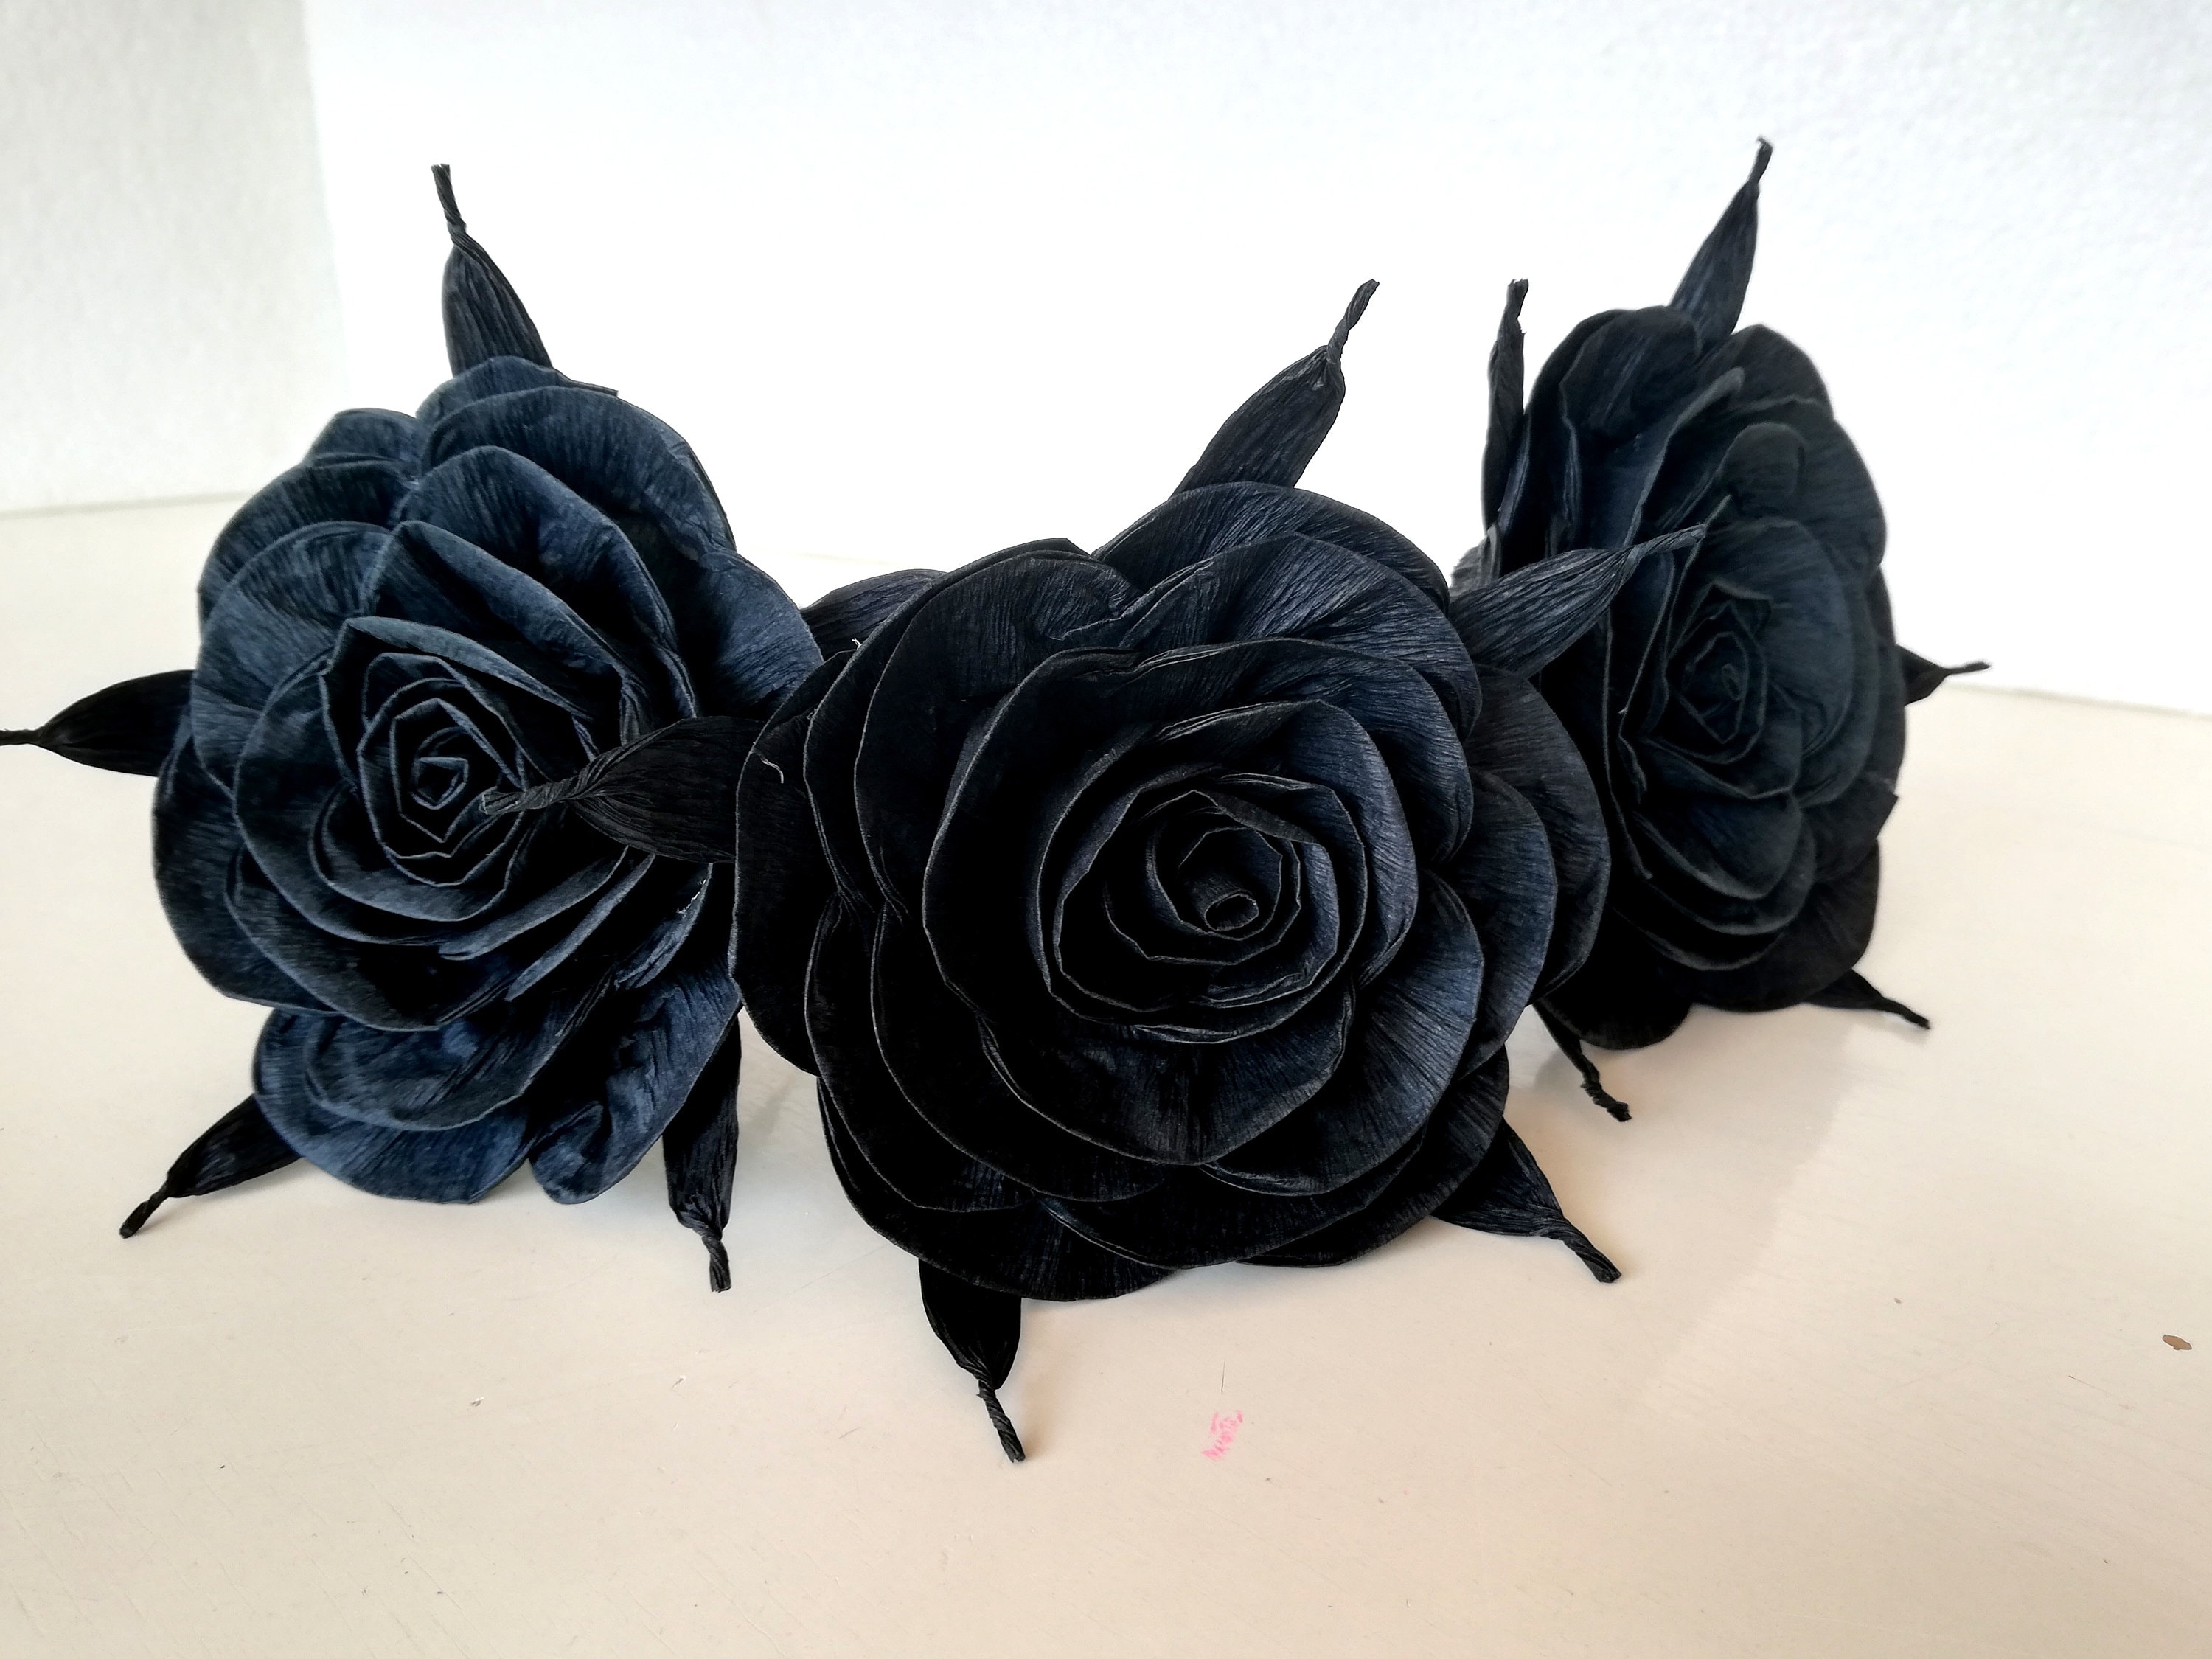 Black Gold Crepe Paper Flowers 6 Roses Bouquet Great Gatsby Gift Graduation  Prom, Wedding Paris Party Decor 21 Birthday Sweet 16 Quinceanera 